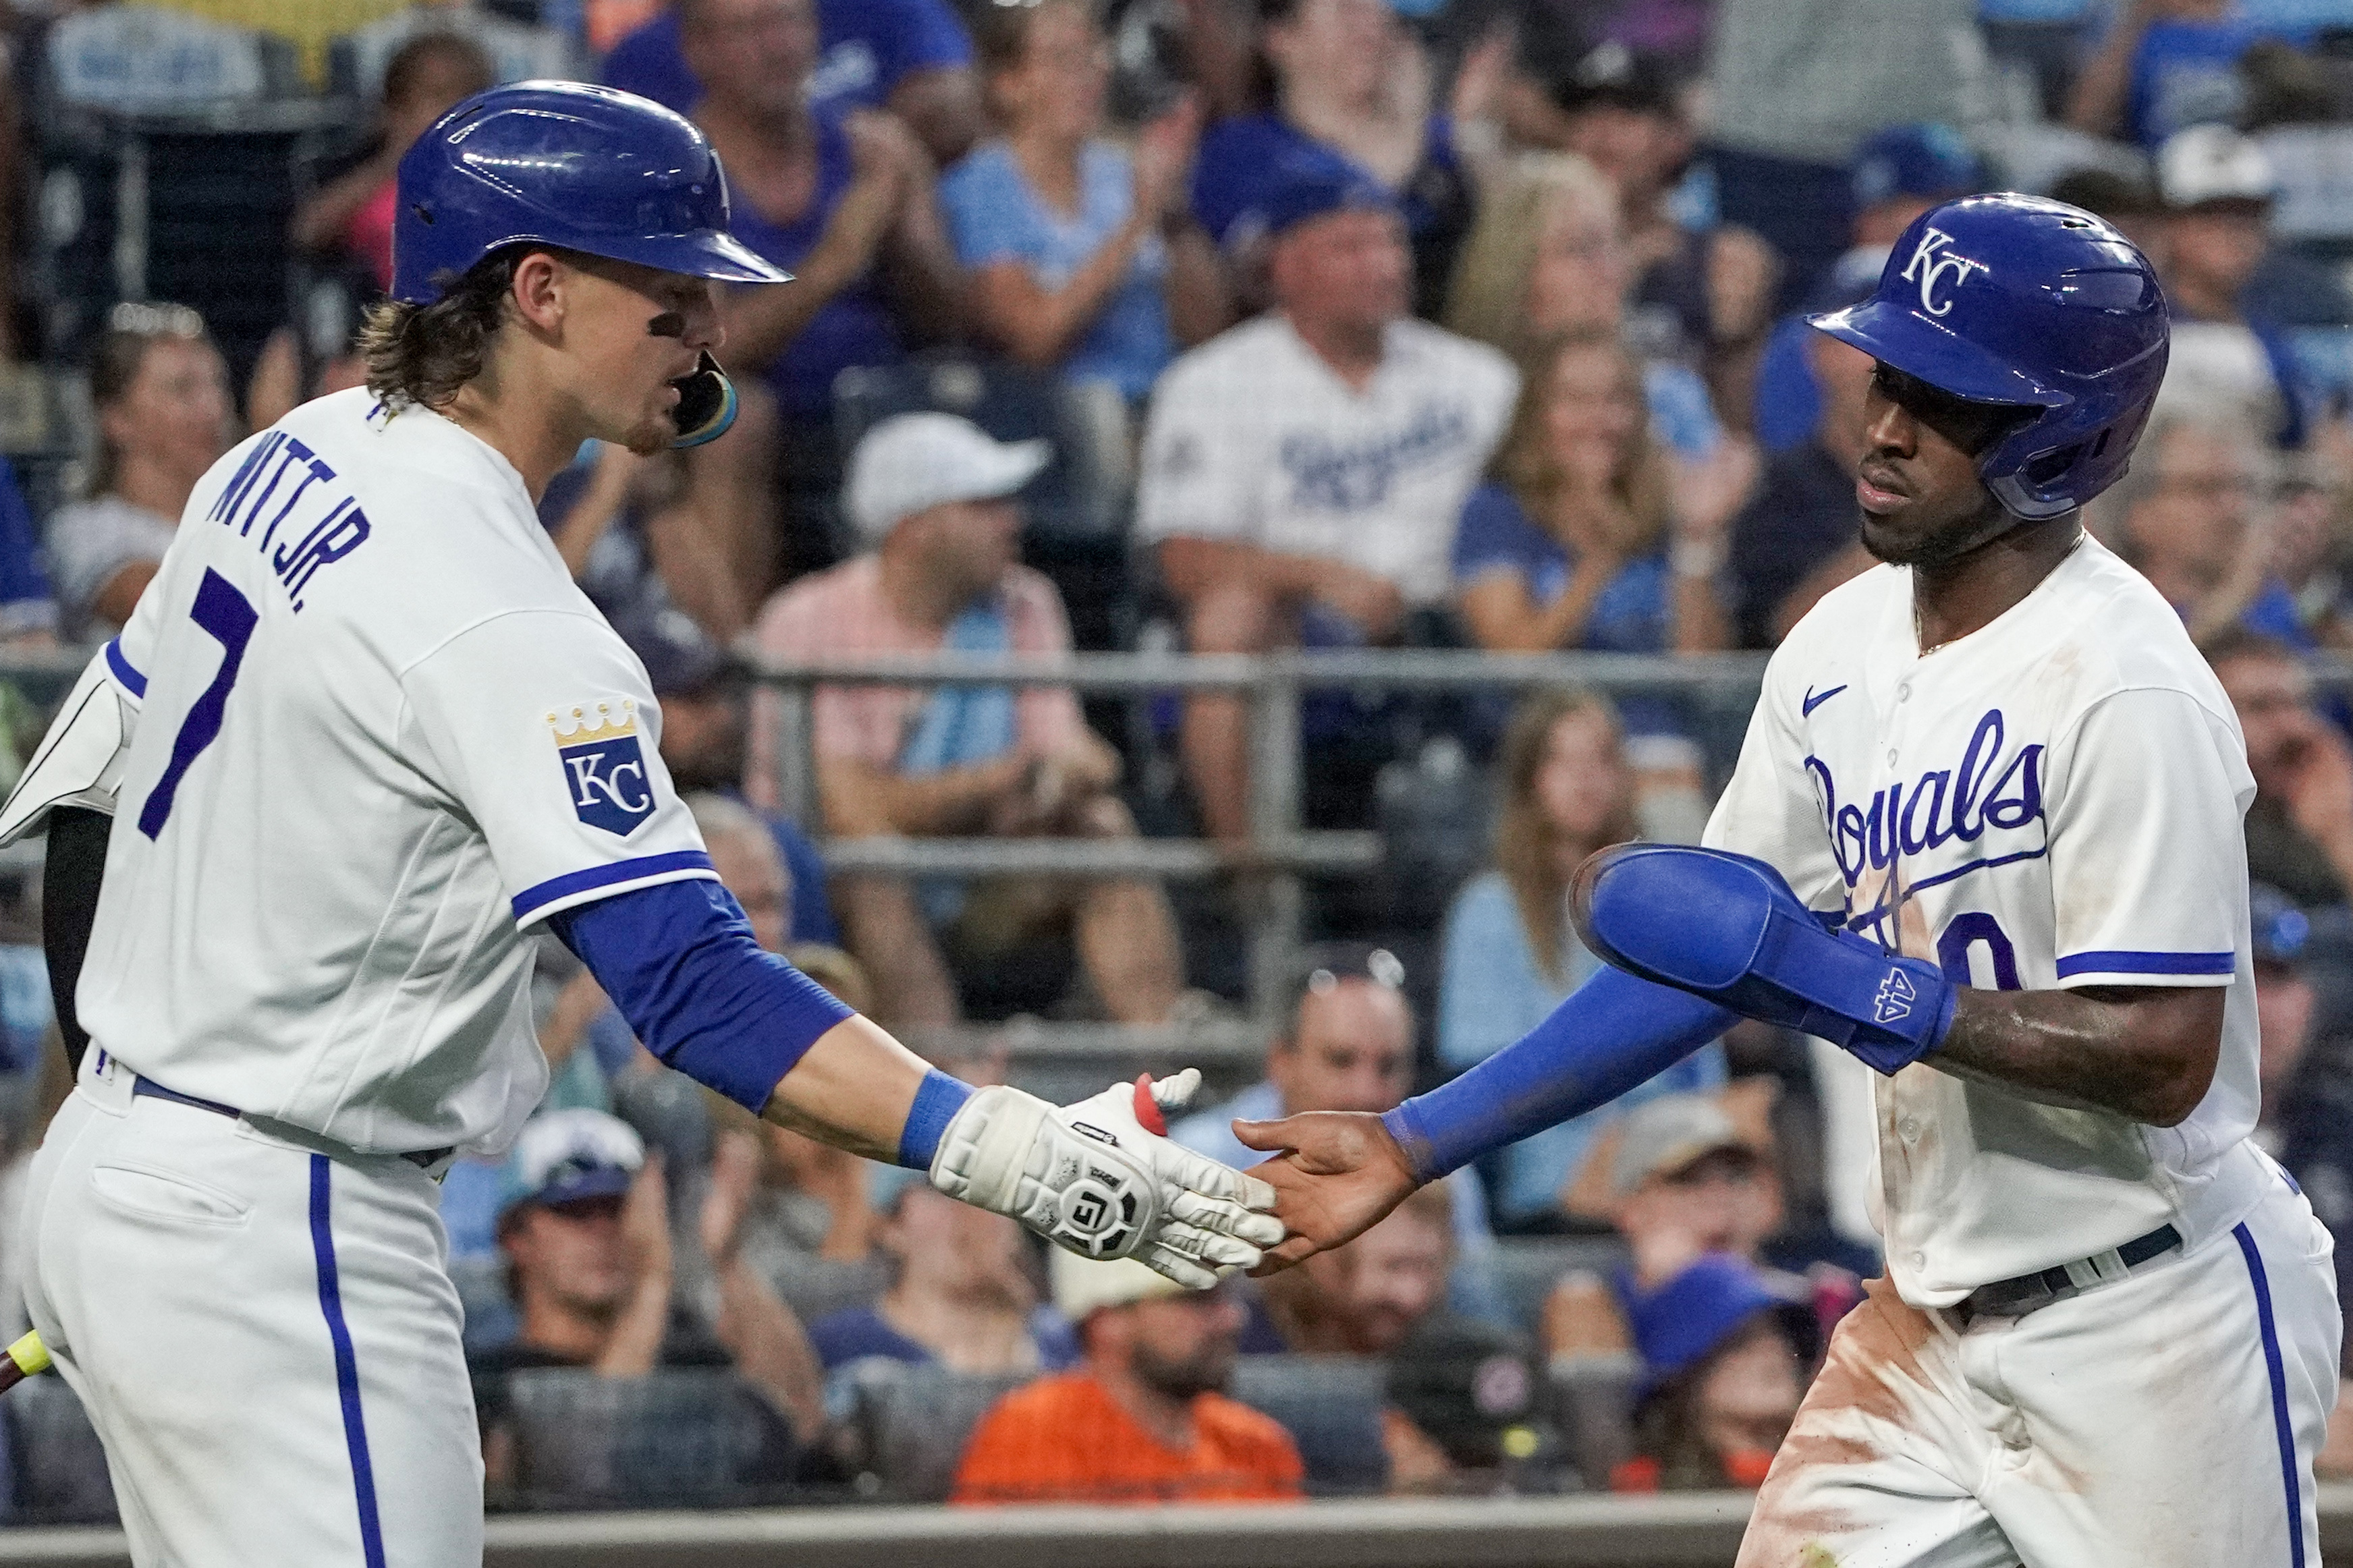 Royals win 4th straight, rally past retooling Mets 7-6 on 10th-inning balk  - ABC News